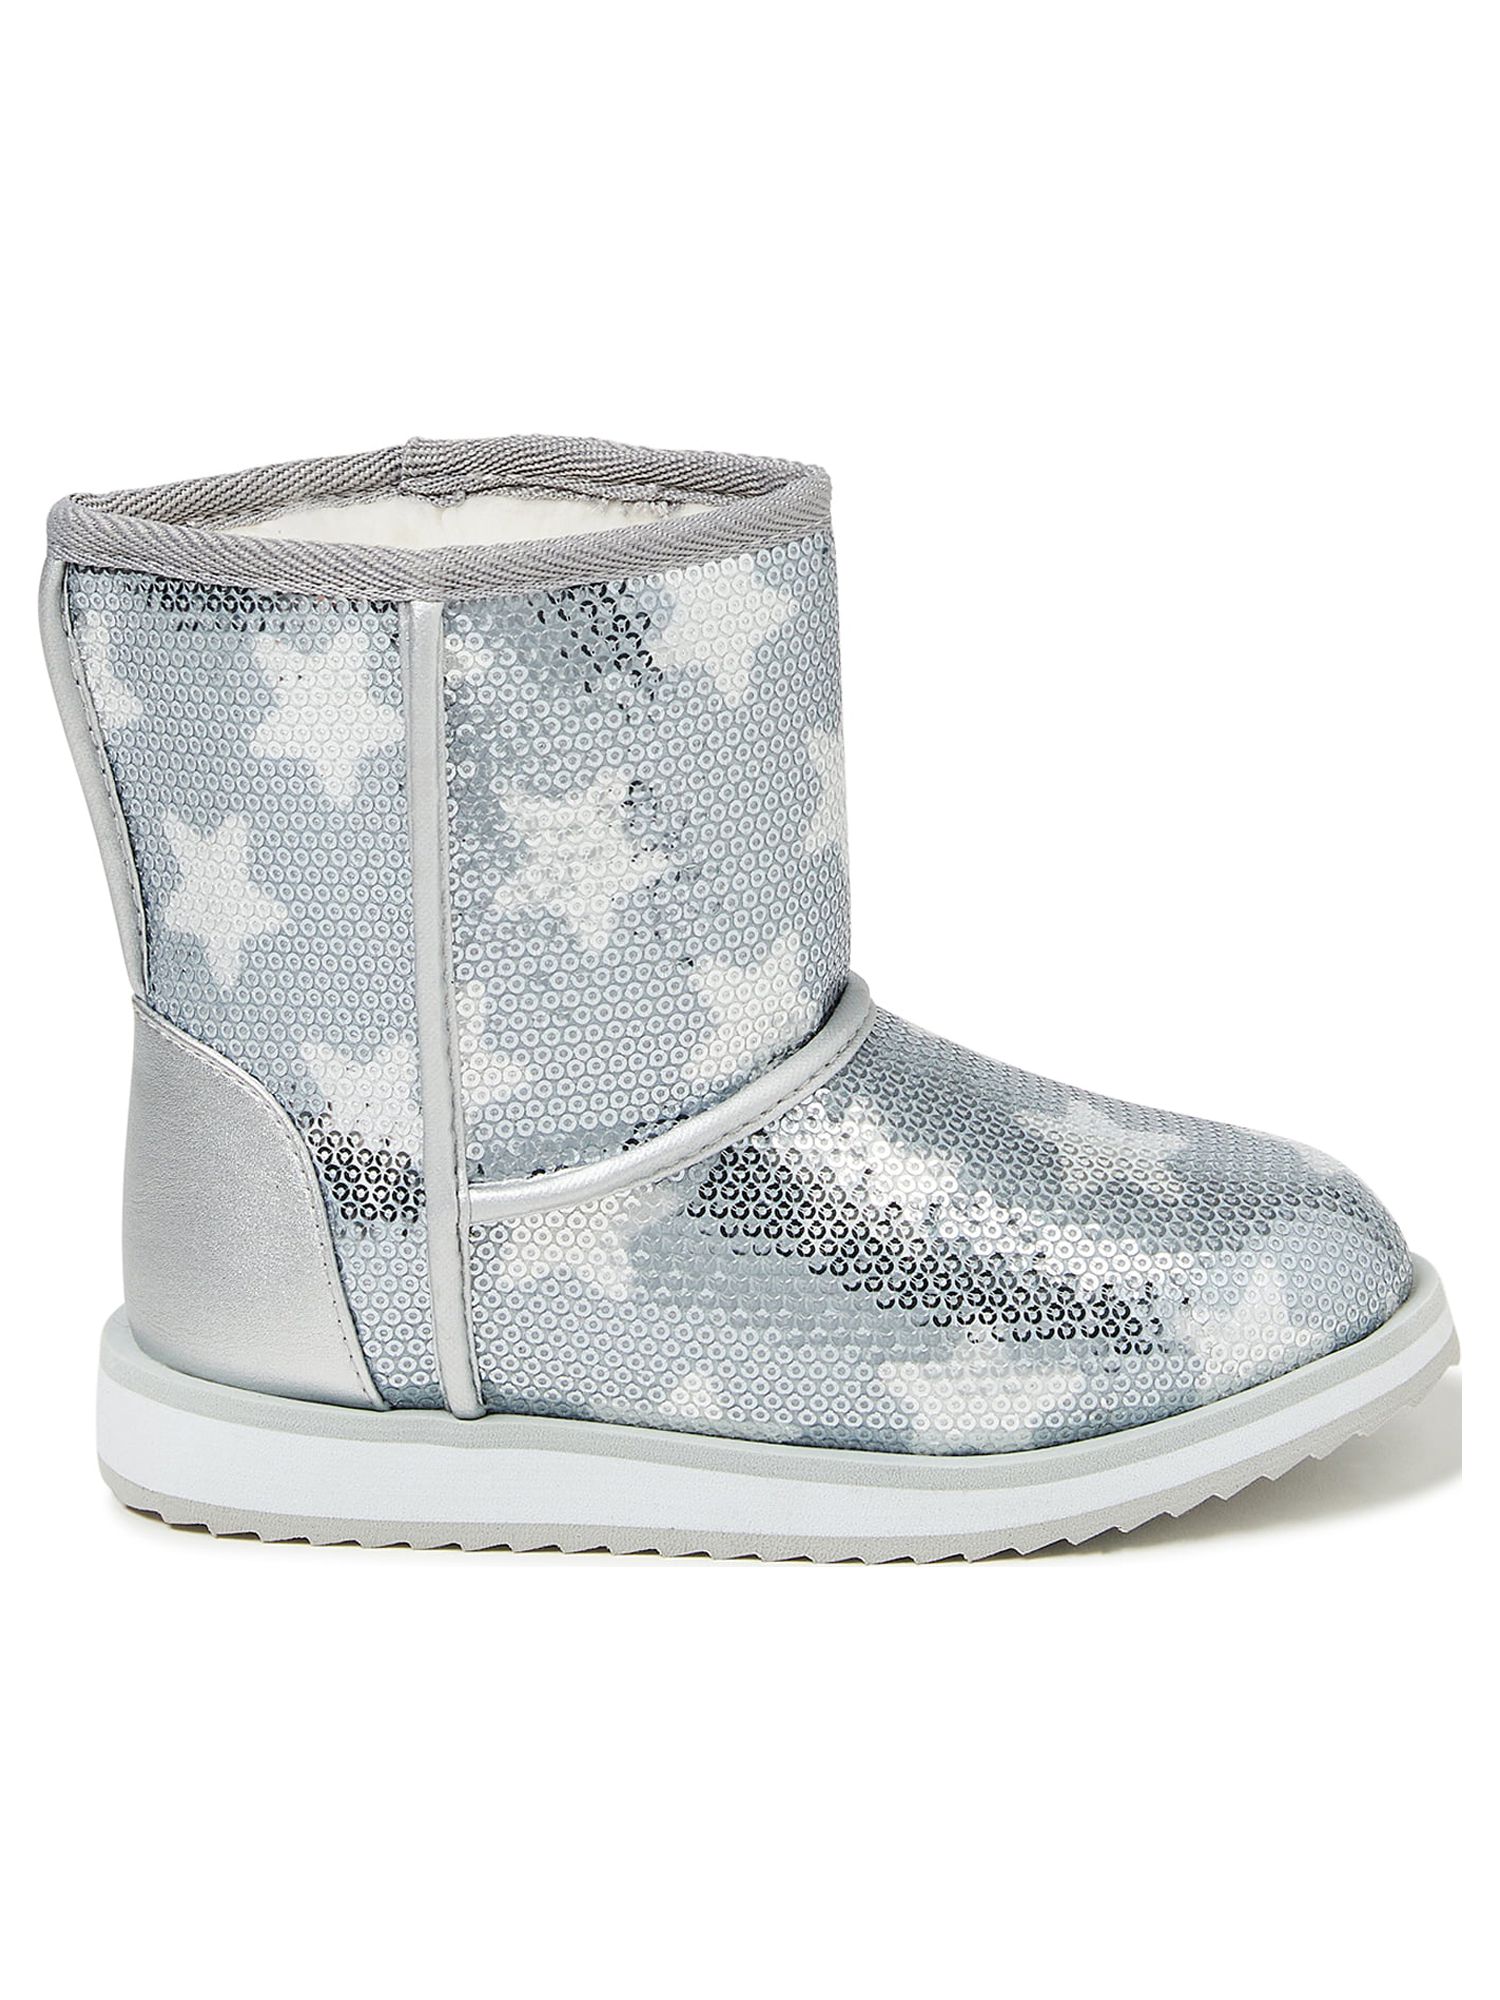 Wonder Nation Little & Big Girl Sequin Faux Shearling Winter Boot, Sizes 13-6 - image 4 of 6